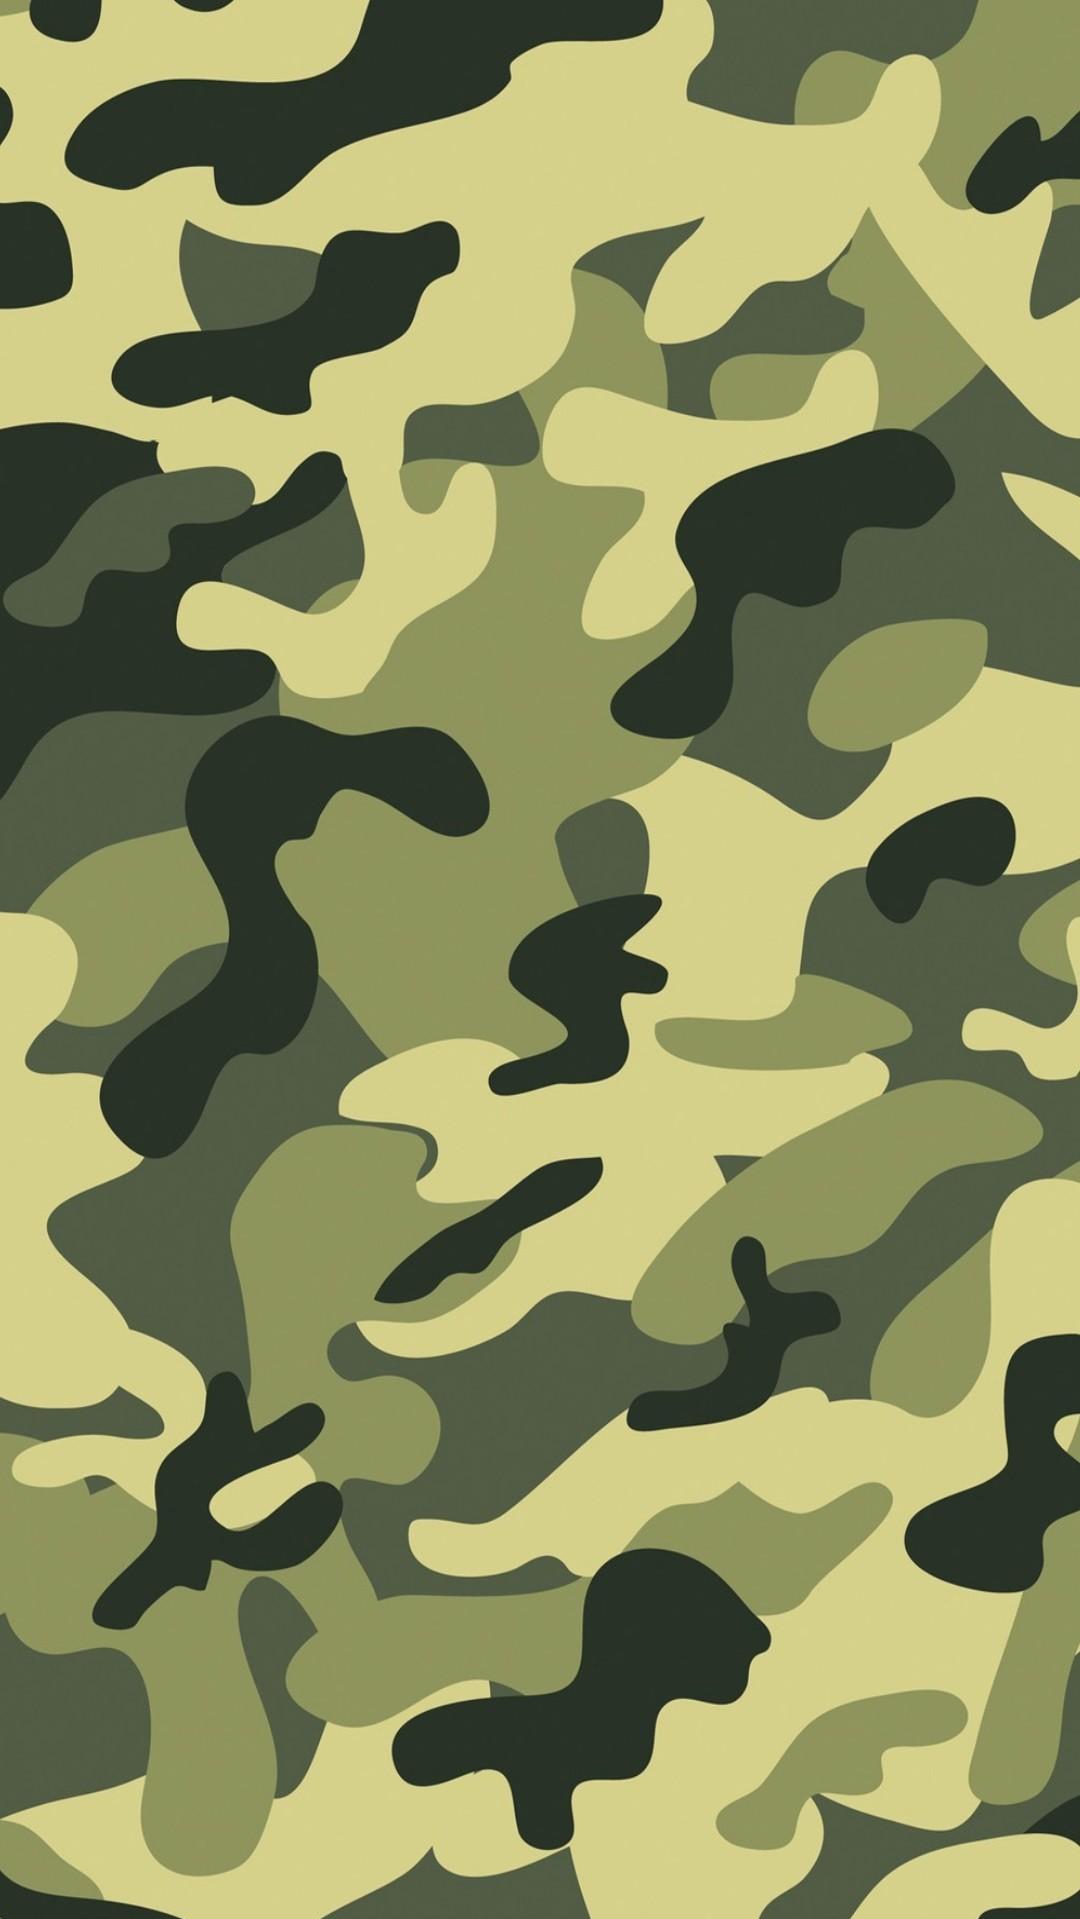 Camouflage wallpaper for iPhone or Android Tags camo hunting